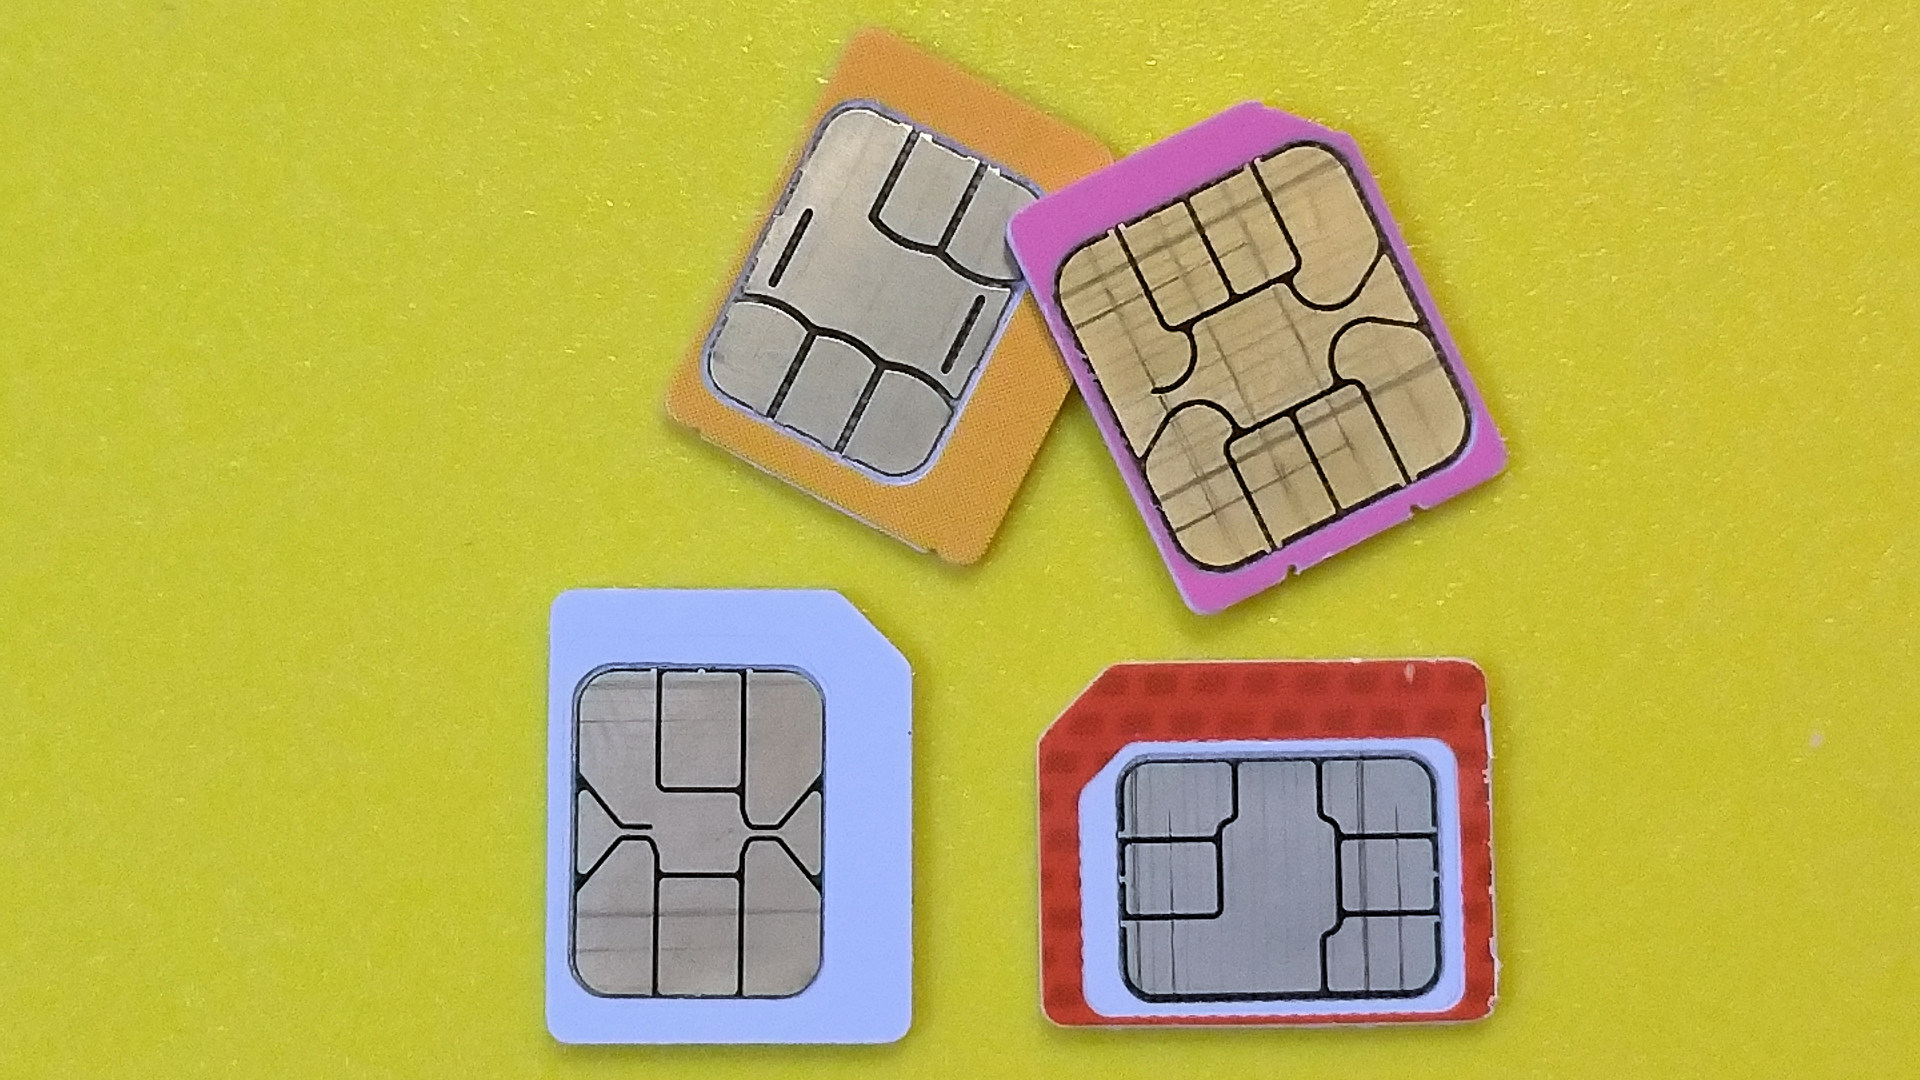 SIM cards personal device